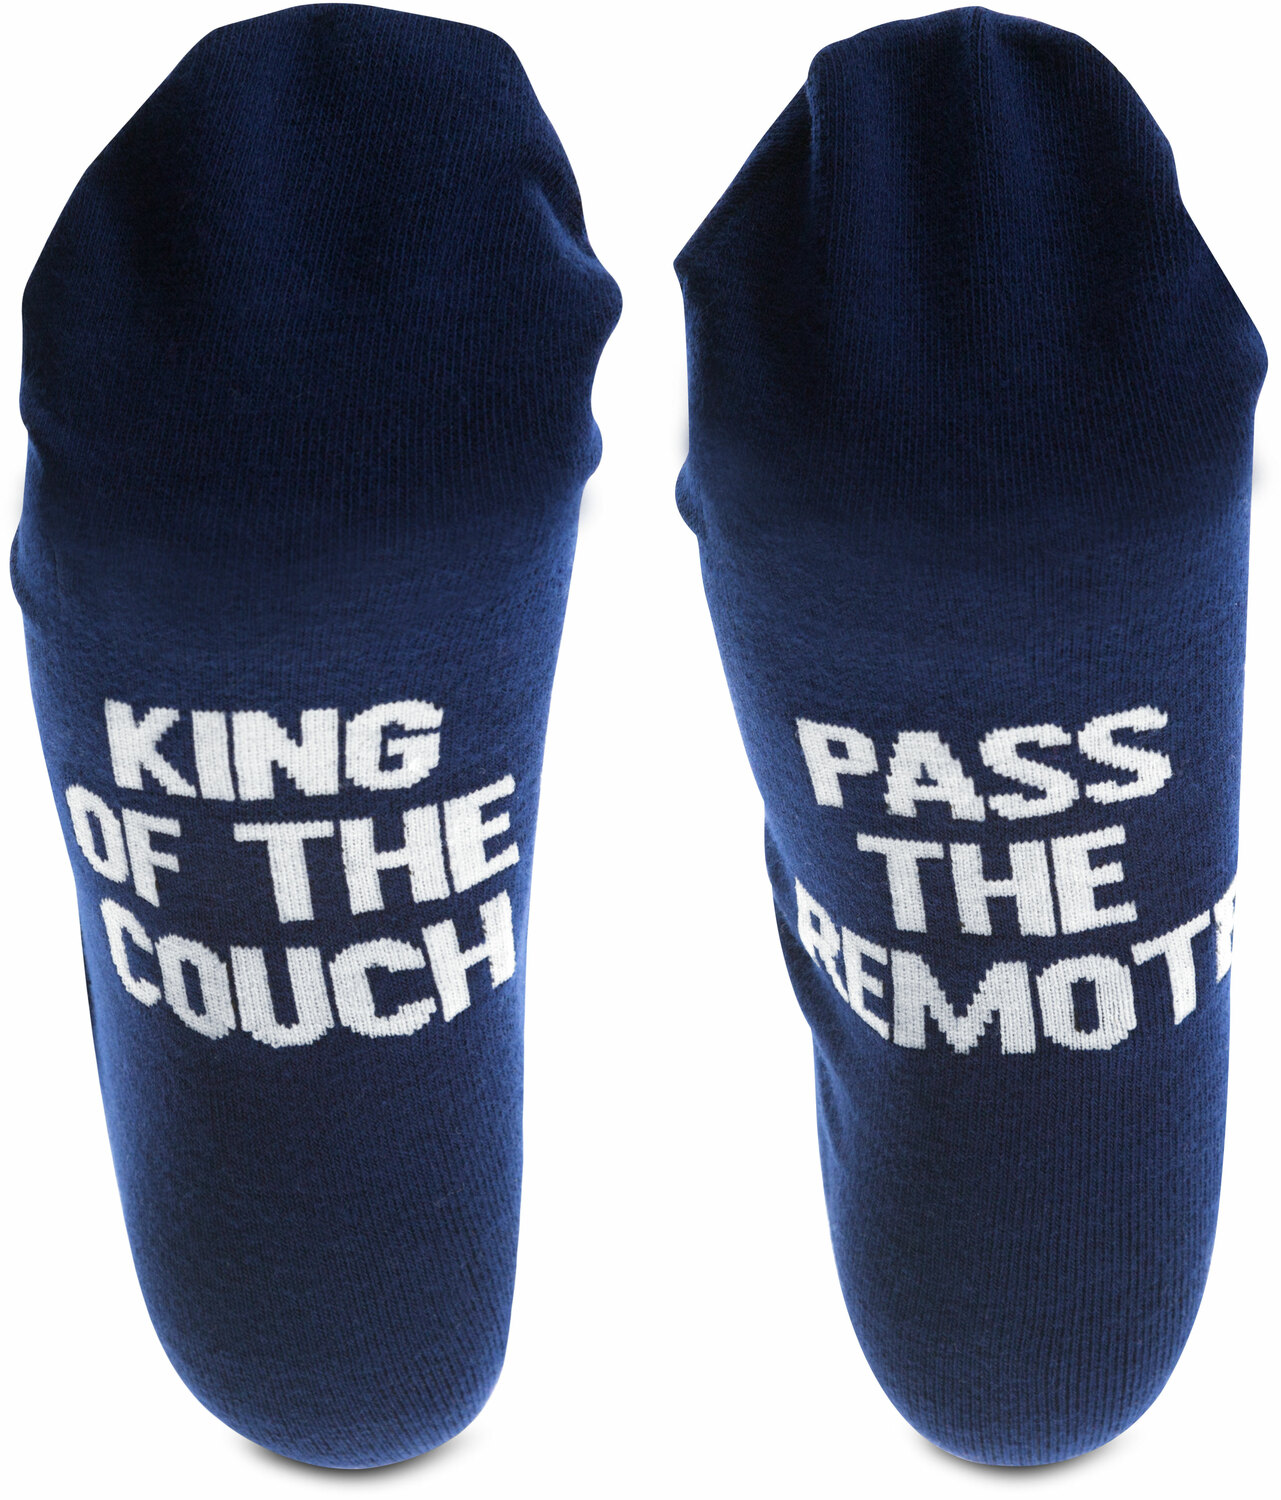 Couch King by Man Made - Couch King - Mens Cotton Blend Sock